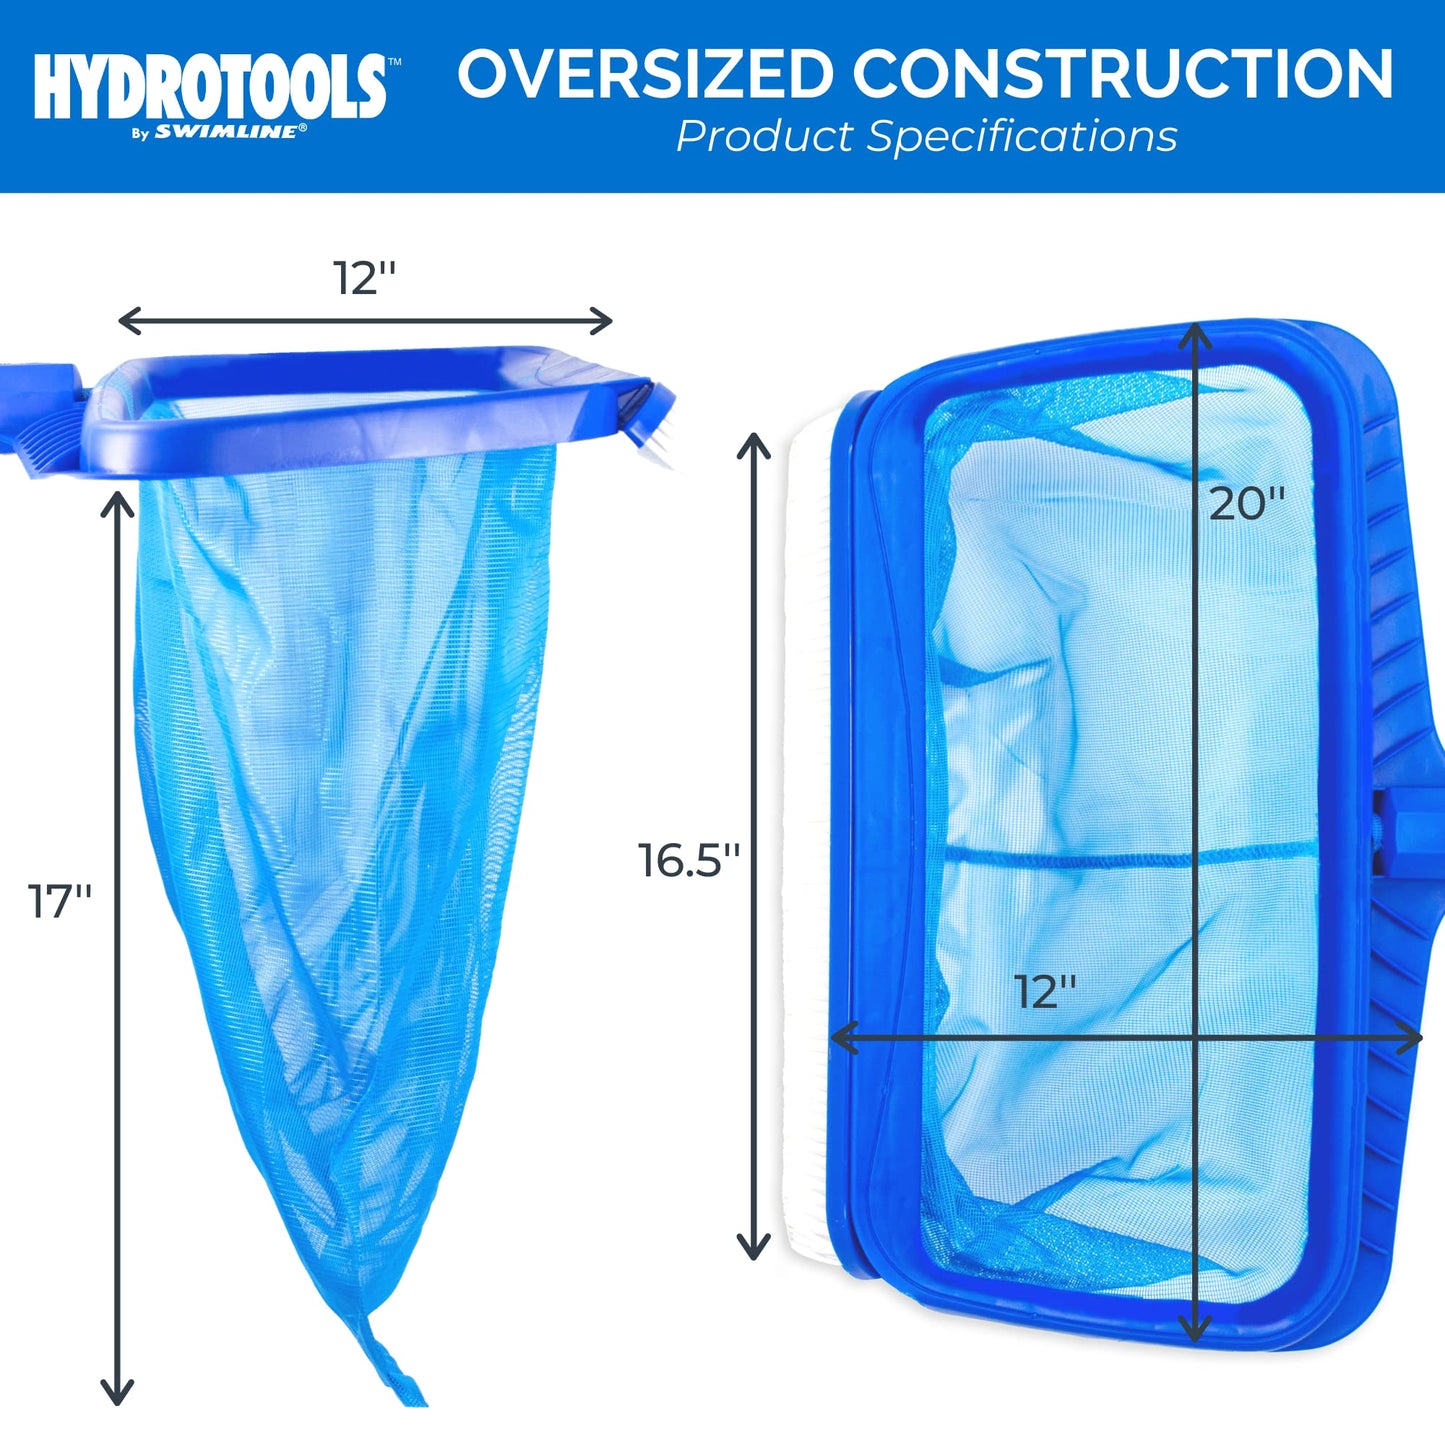 HYDROTOOLS By SWIMLINE 8041 Leaf Net For Inground Above Ground Pool Pond | Extra Large Skimmer Net Cleaning Tool Ultra Fine Deep Mesh Bag | Durable Reinforced Plastic Frame With Brush | Debris Pickup Heavy Duty W/ Brush (Molded)